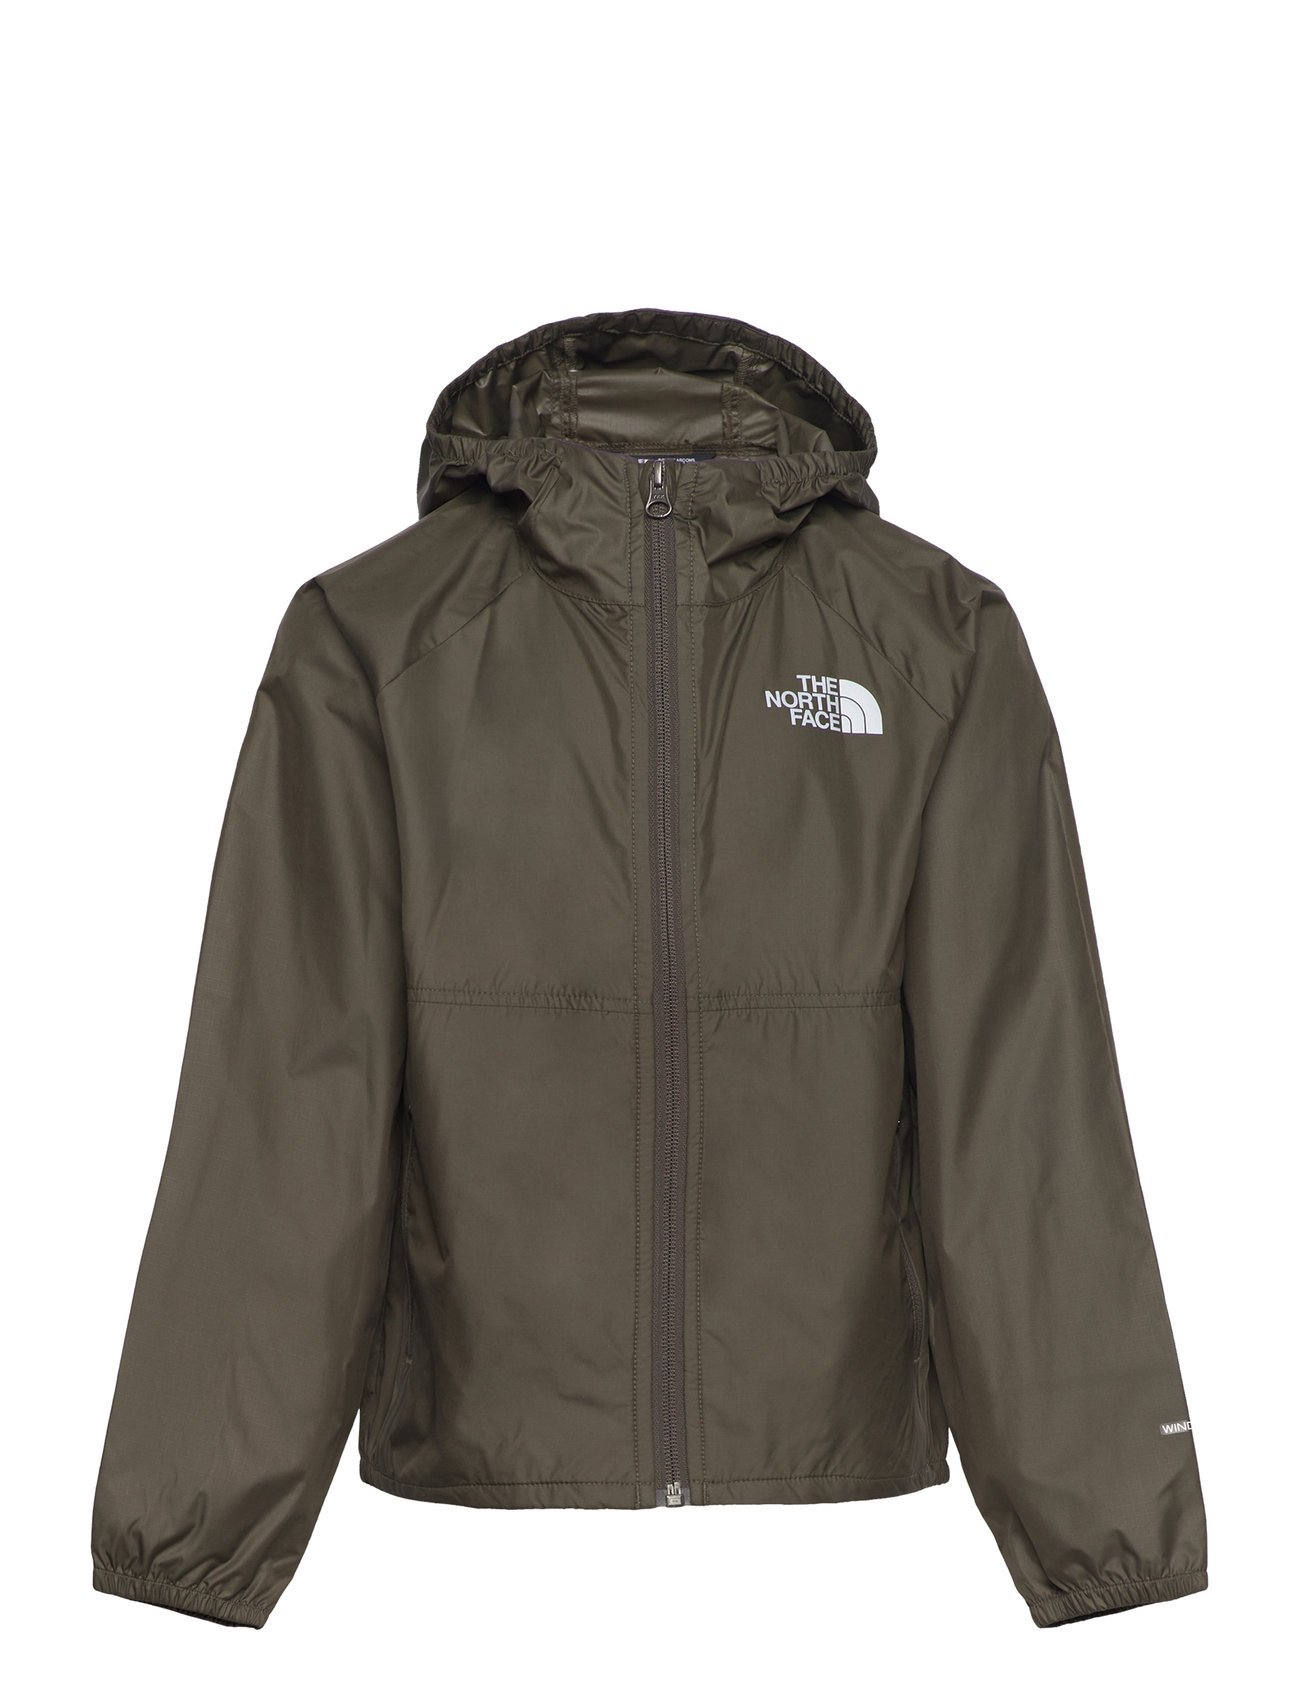 The North Face B Never Stop Wind Jacket - 70 €. Buy Windbreaker from ...